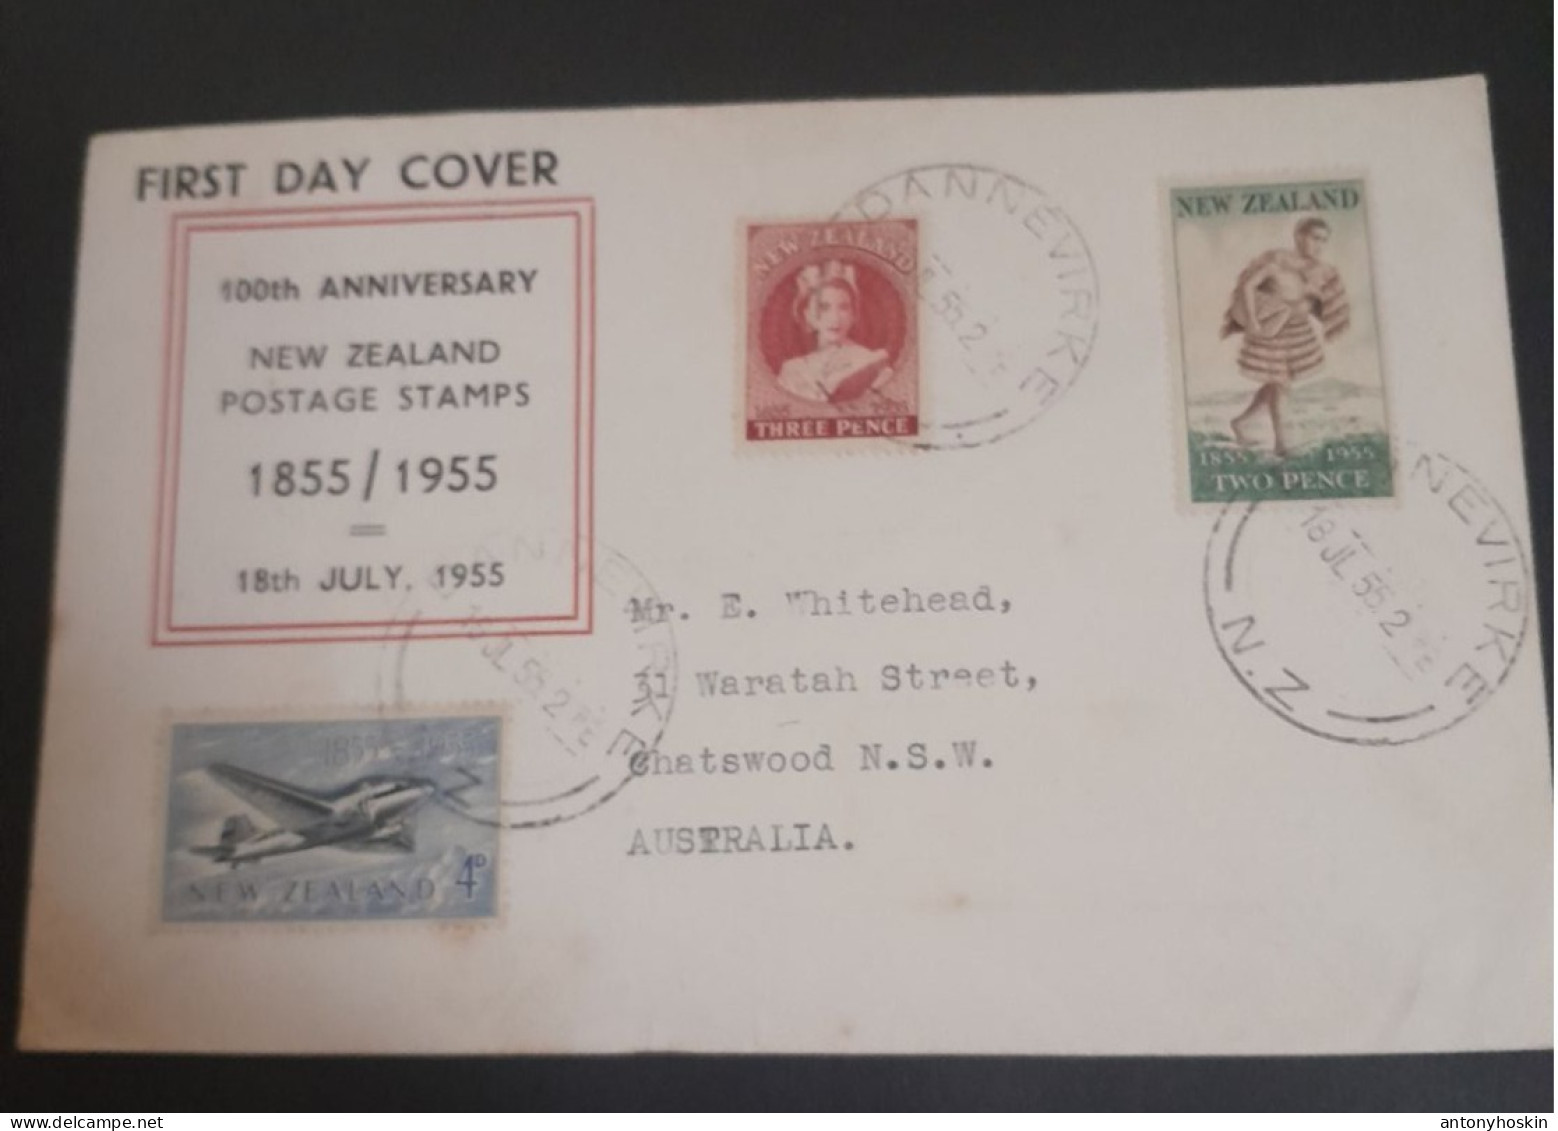 1855-1955 New Zealand Postage Stamps 100 Th Anniversary First Day Cover. - Briefe U. Dokumente